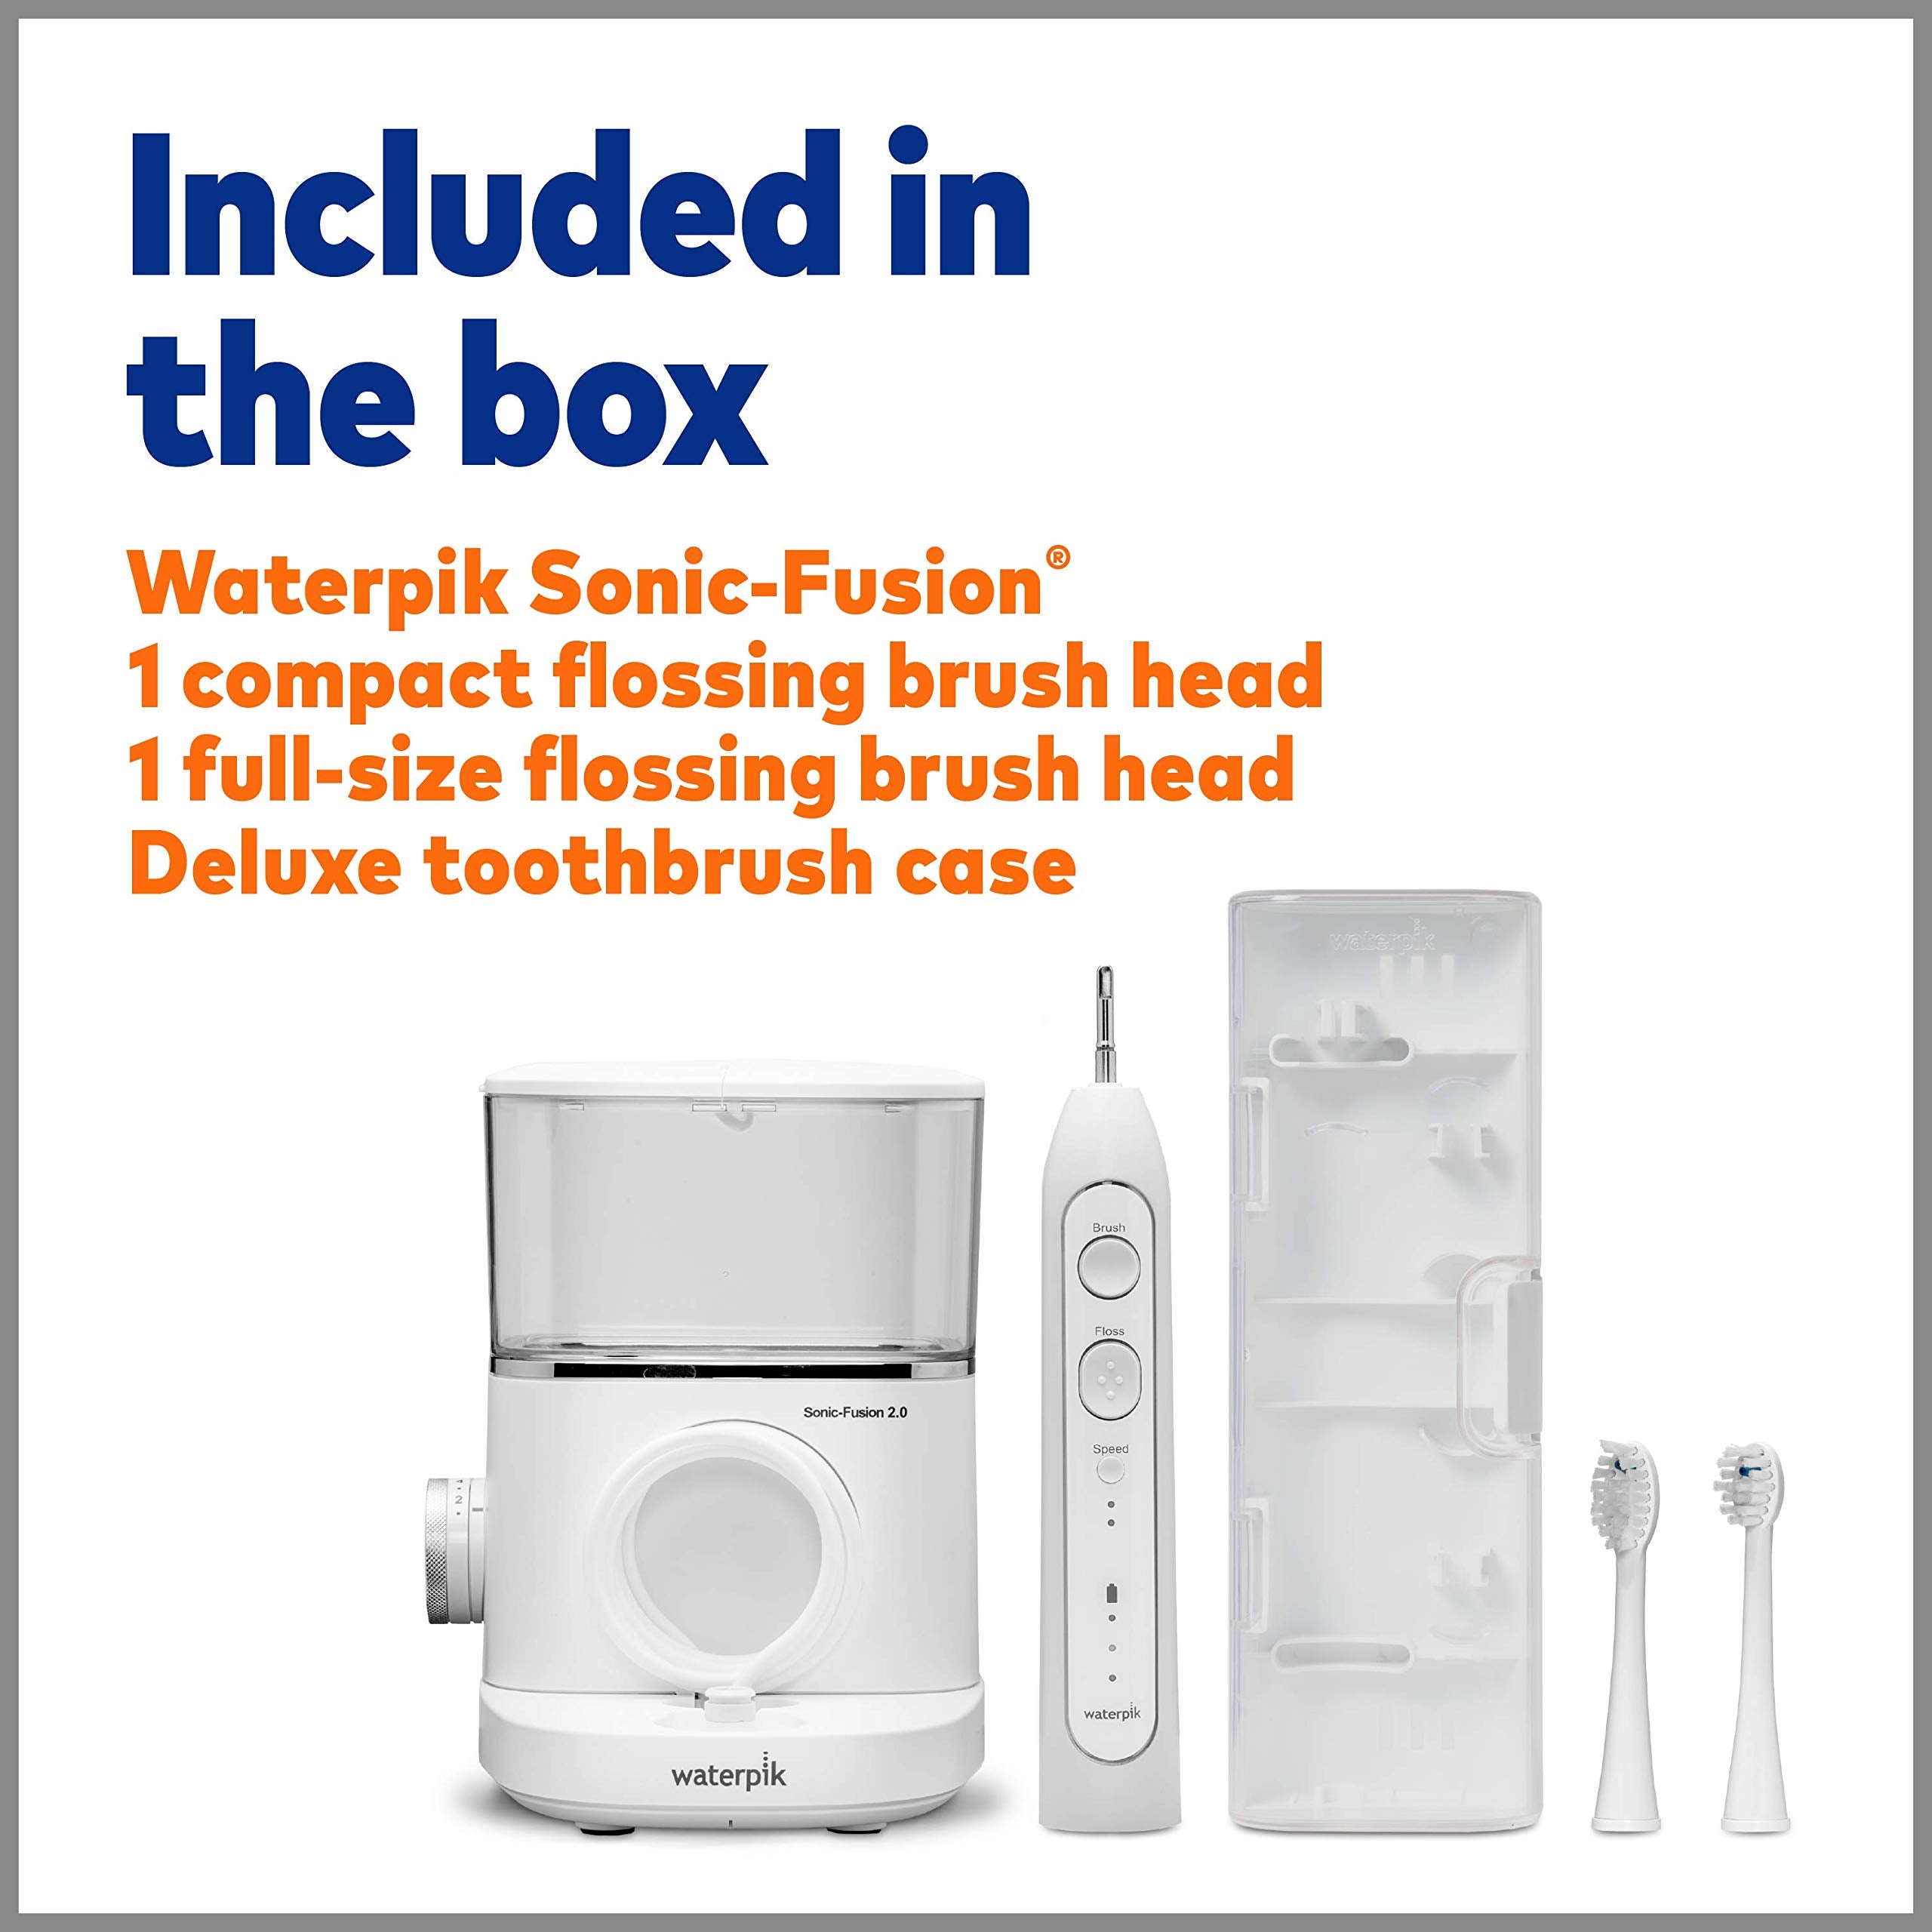 Waterpik Sonic-Fusion 2.0 Professional Flossing Toothbrush - White - SF04 (7609039847662)